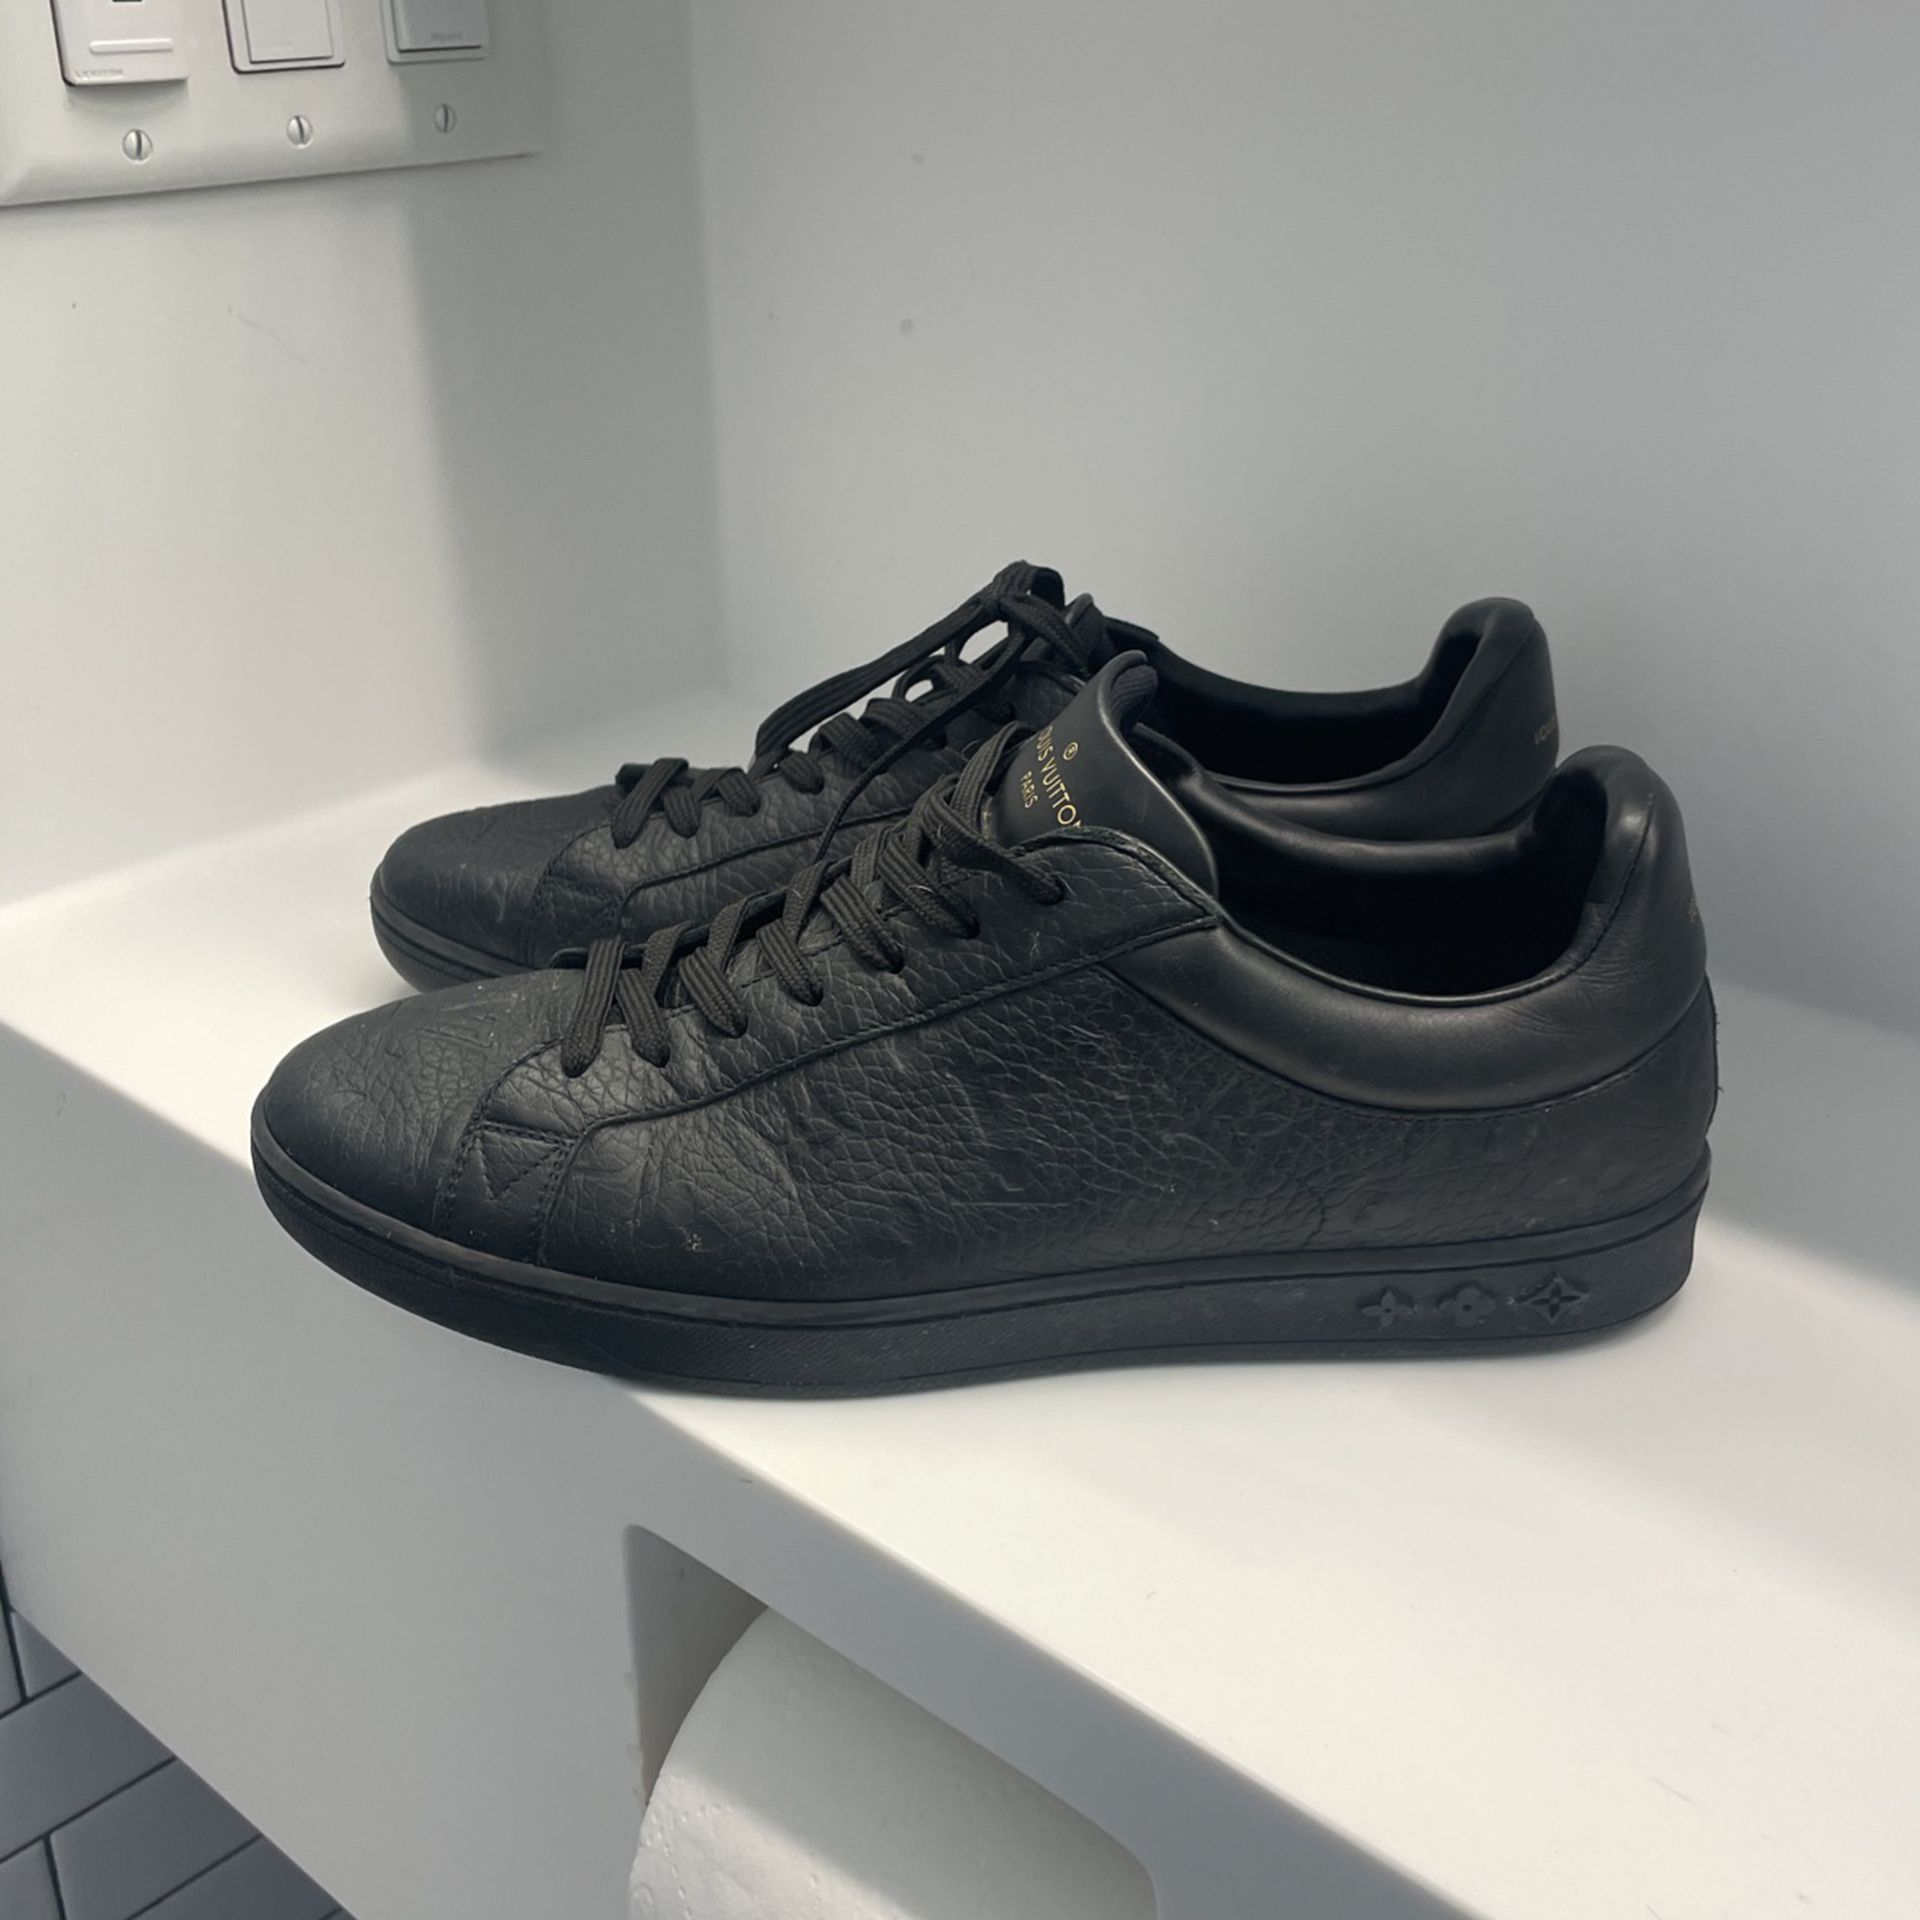 Louis Vuitton, Shoes, Selling A Used Lv Luxembourg Sneakers Like New